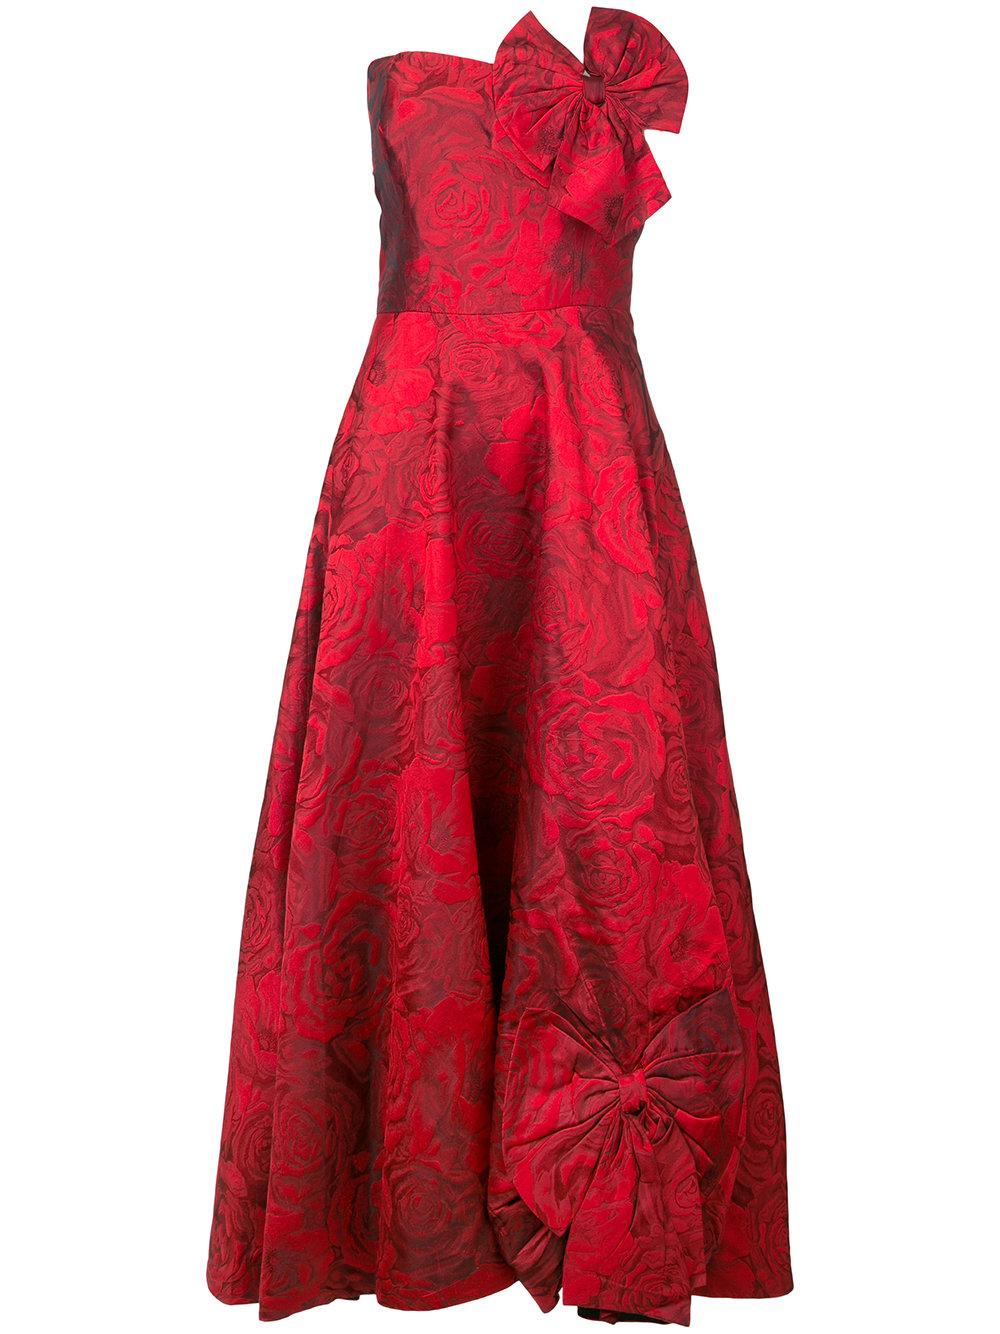 Lyst - Bambah Rose Pin Up Dress in Red